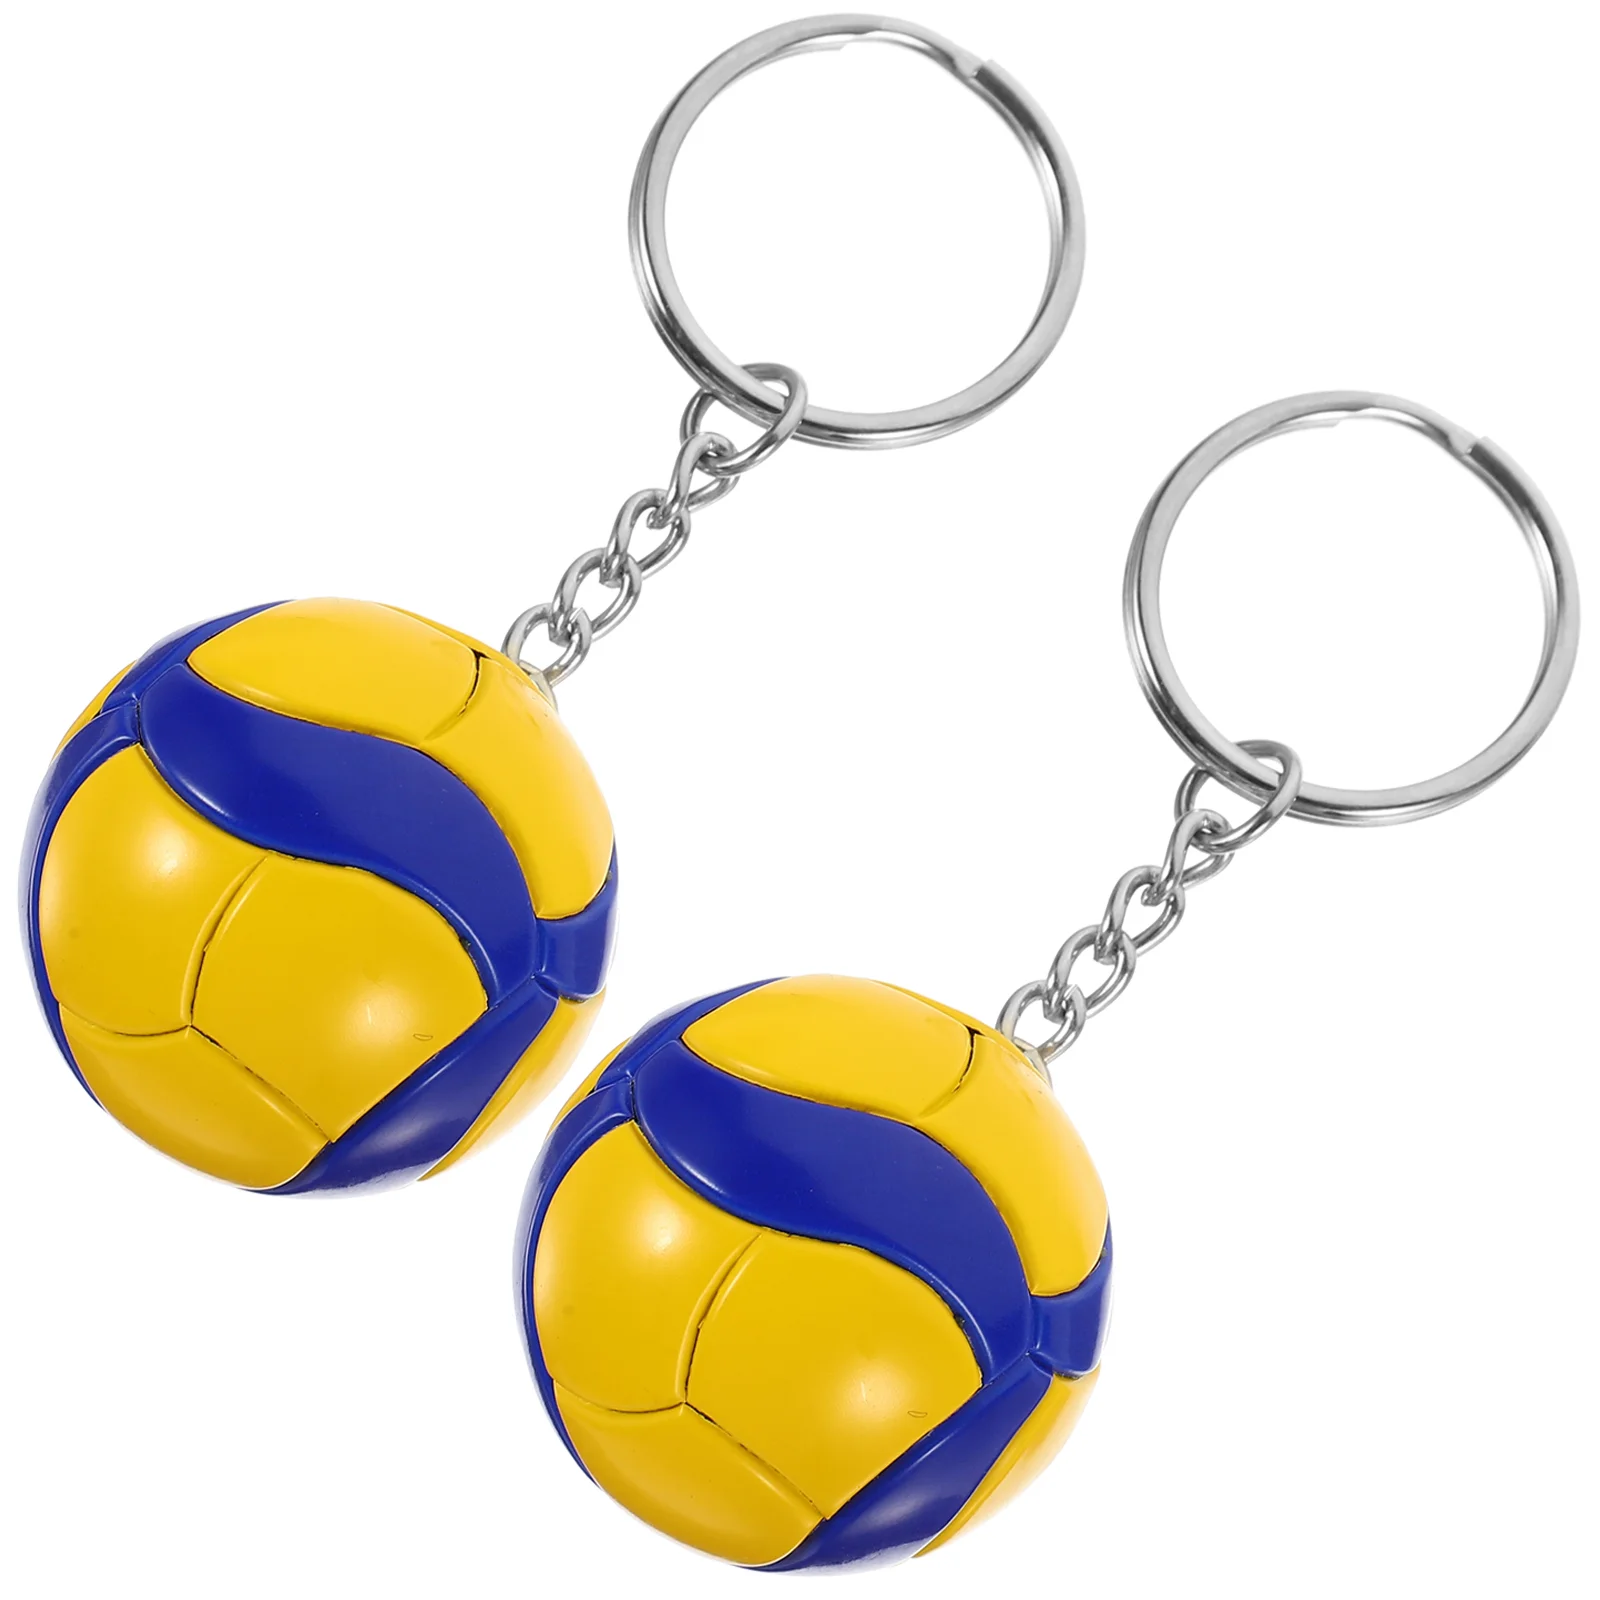 

2 Pcs Volleyball Model Toy Compact Keychain Adorable Children Purse Bag Supply Car Keys Hanging Multi-function